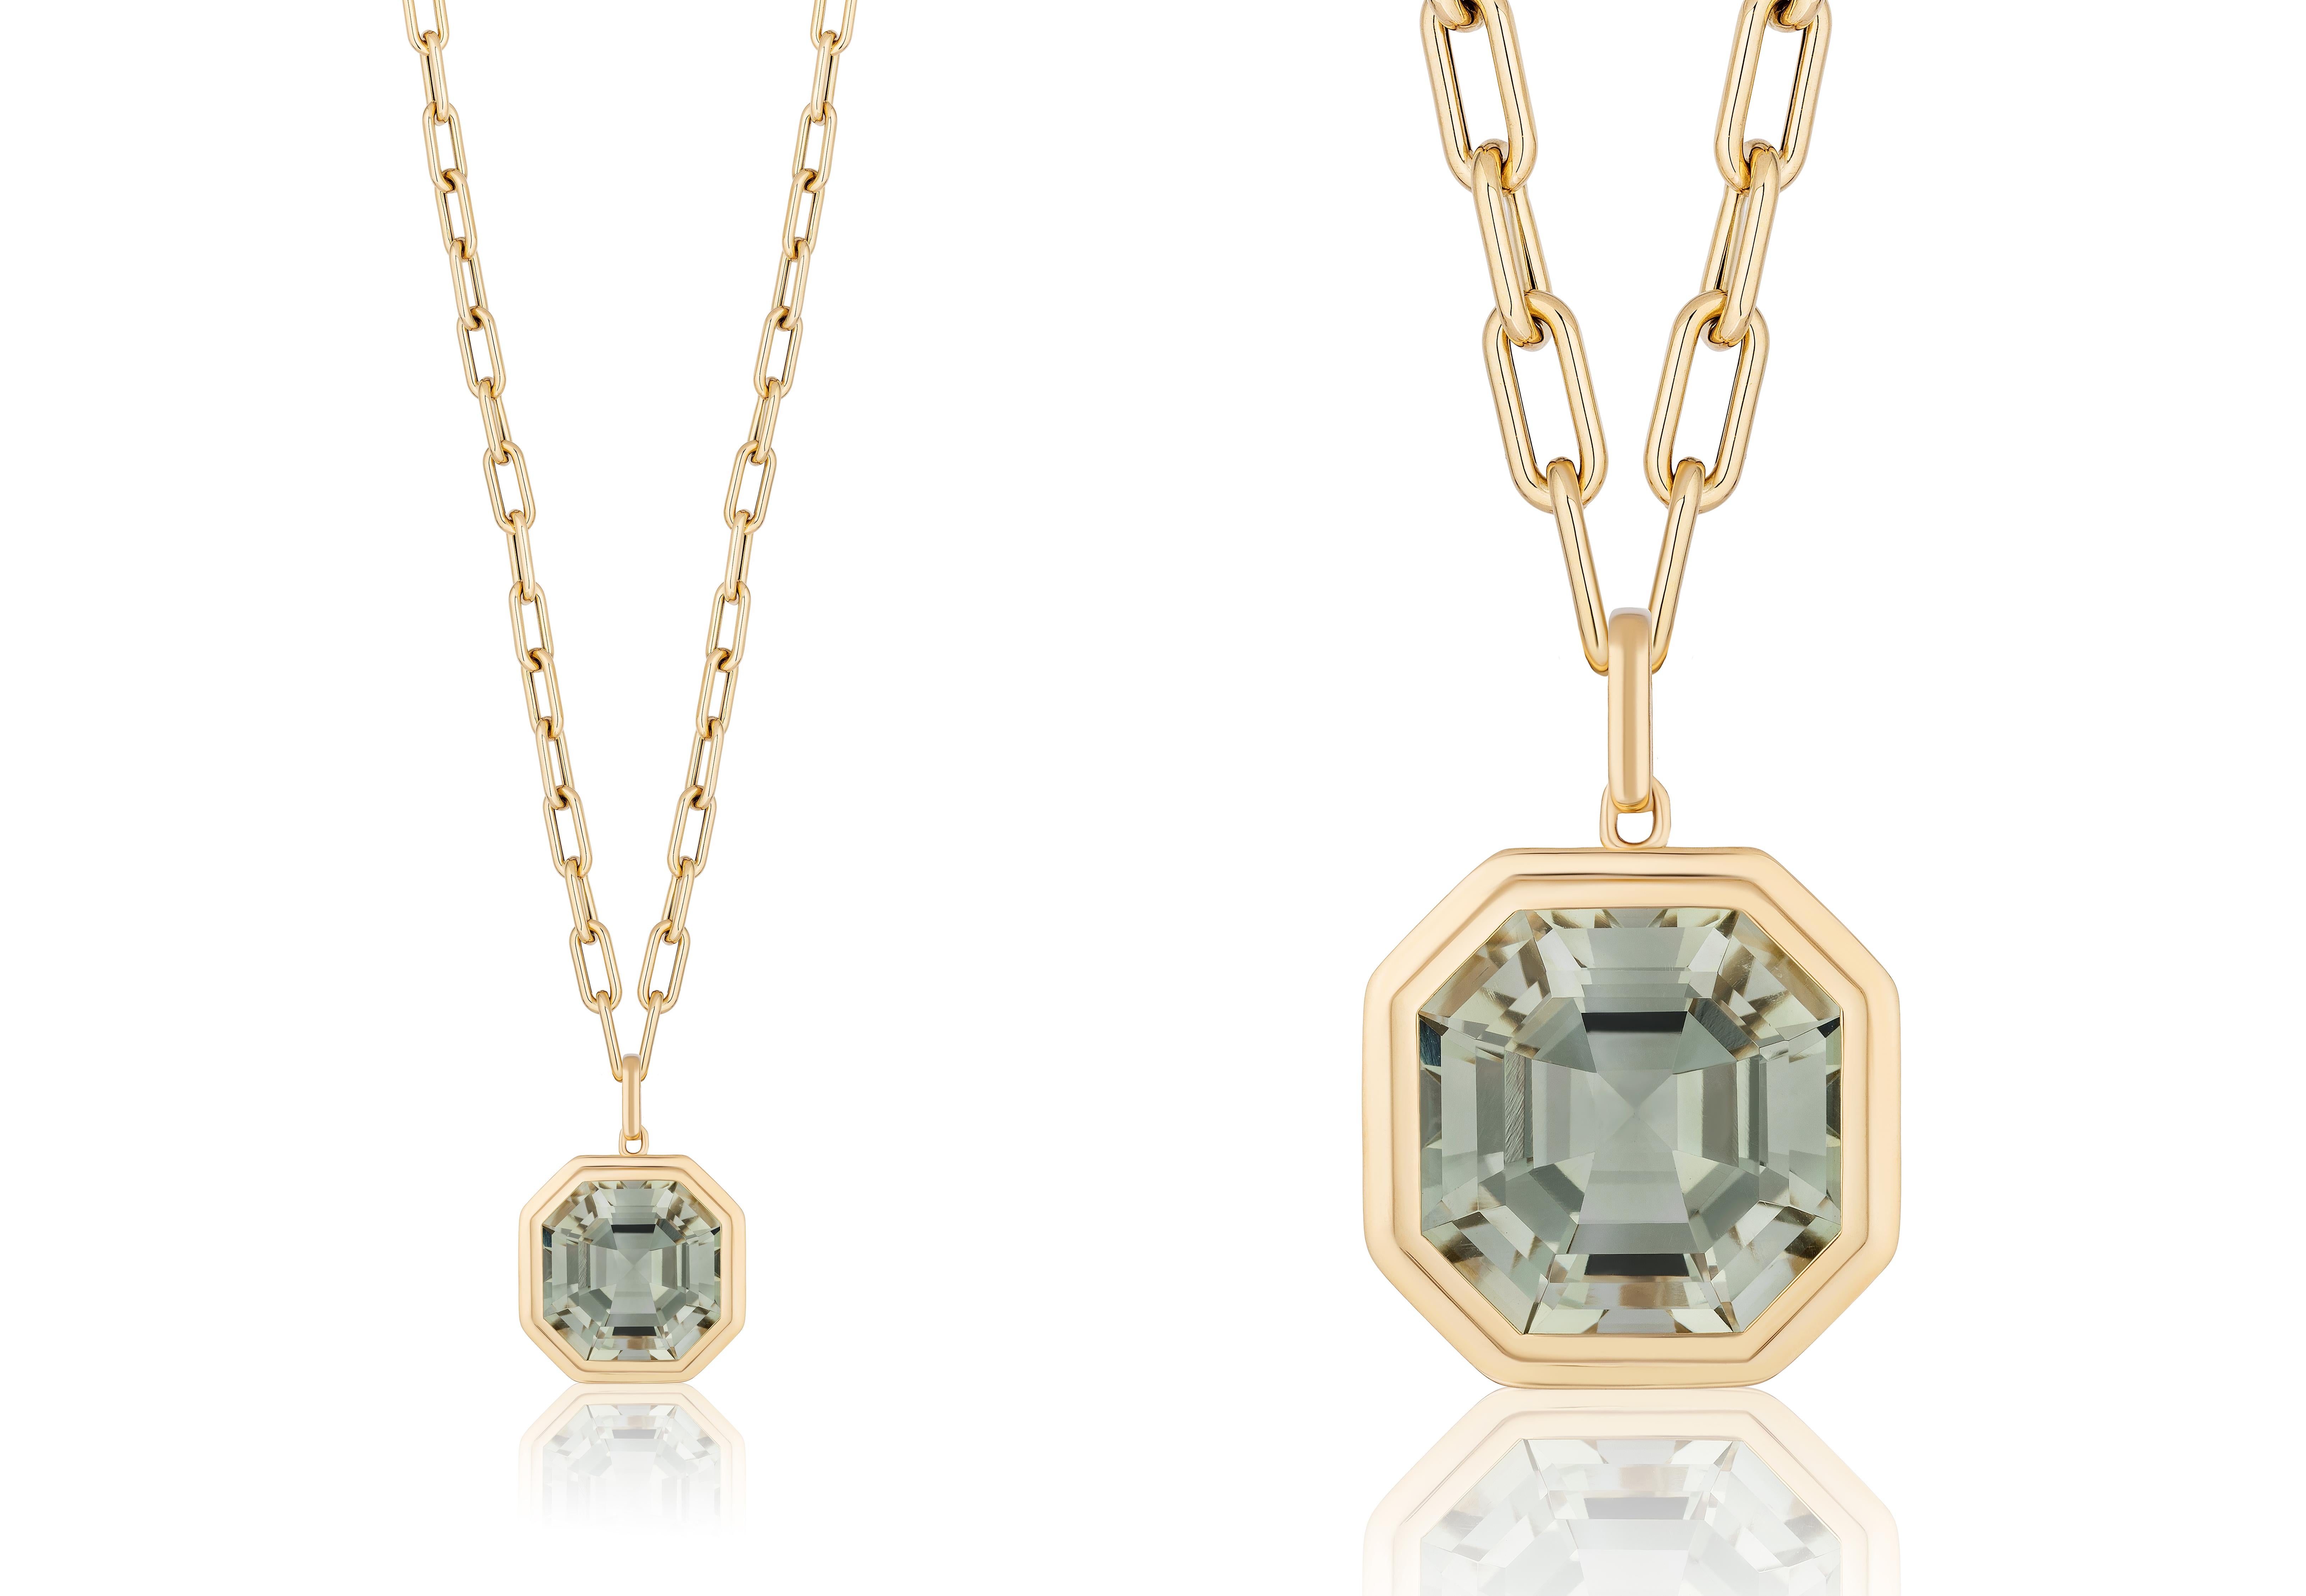 This Prasiolite Asscher Cut Pendant in 18K Yellow Gold is an elegant and sophisticated piece from the 